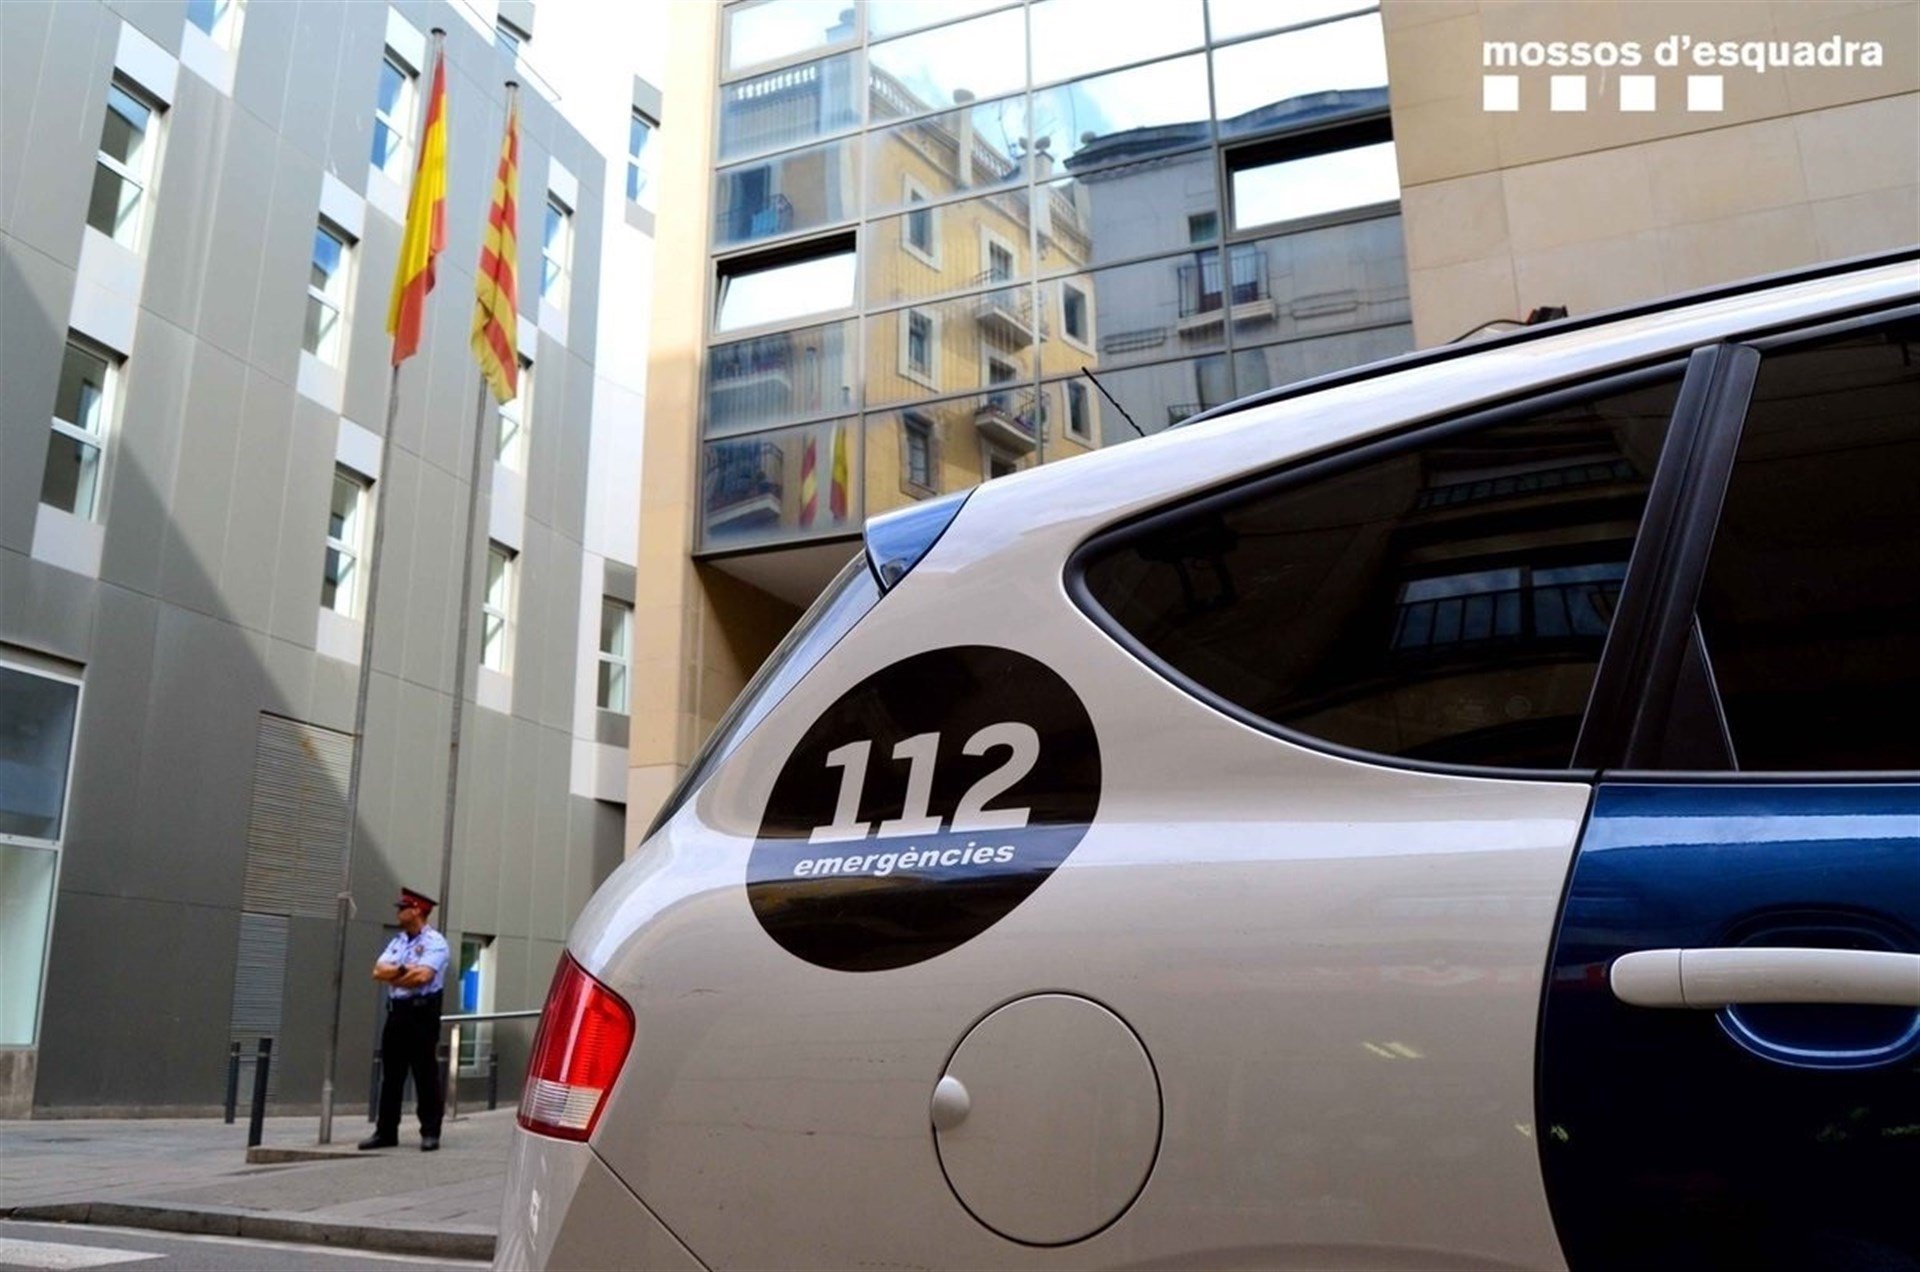 Four hooded figures assault citizen in Figueres polling station